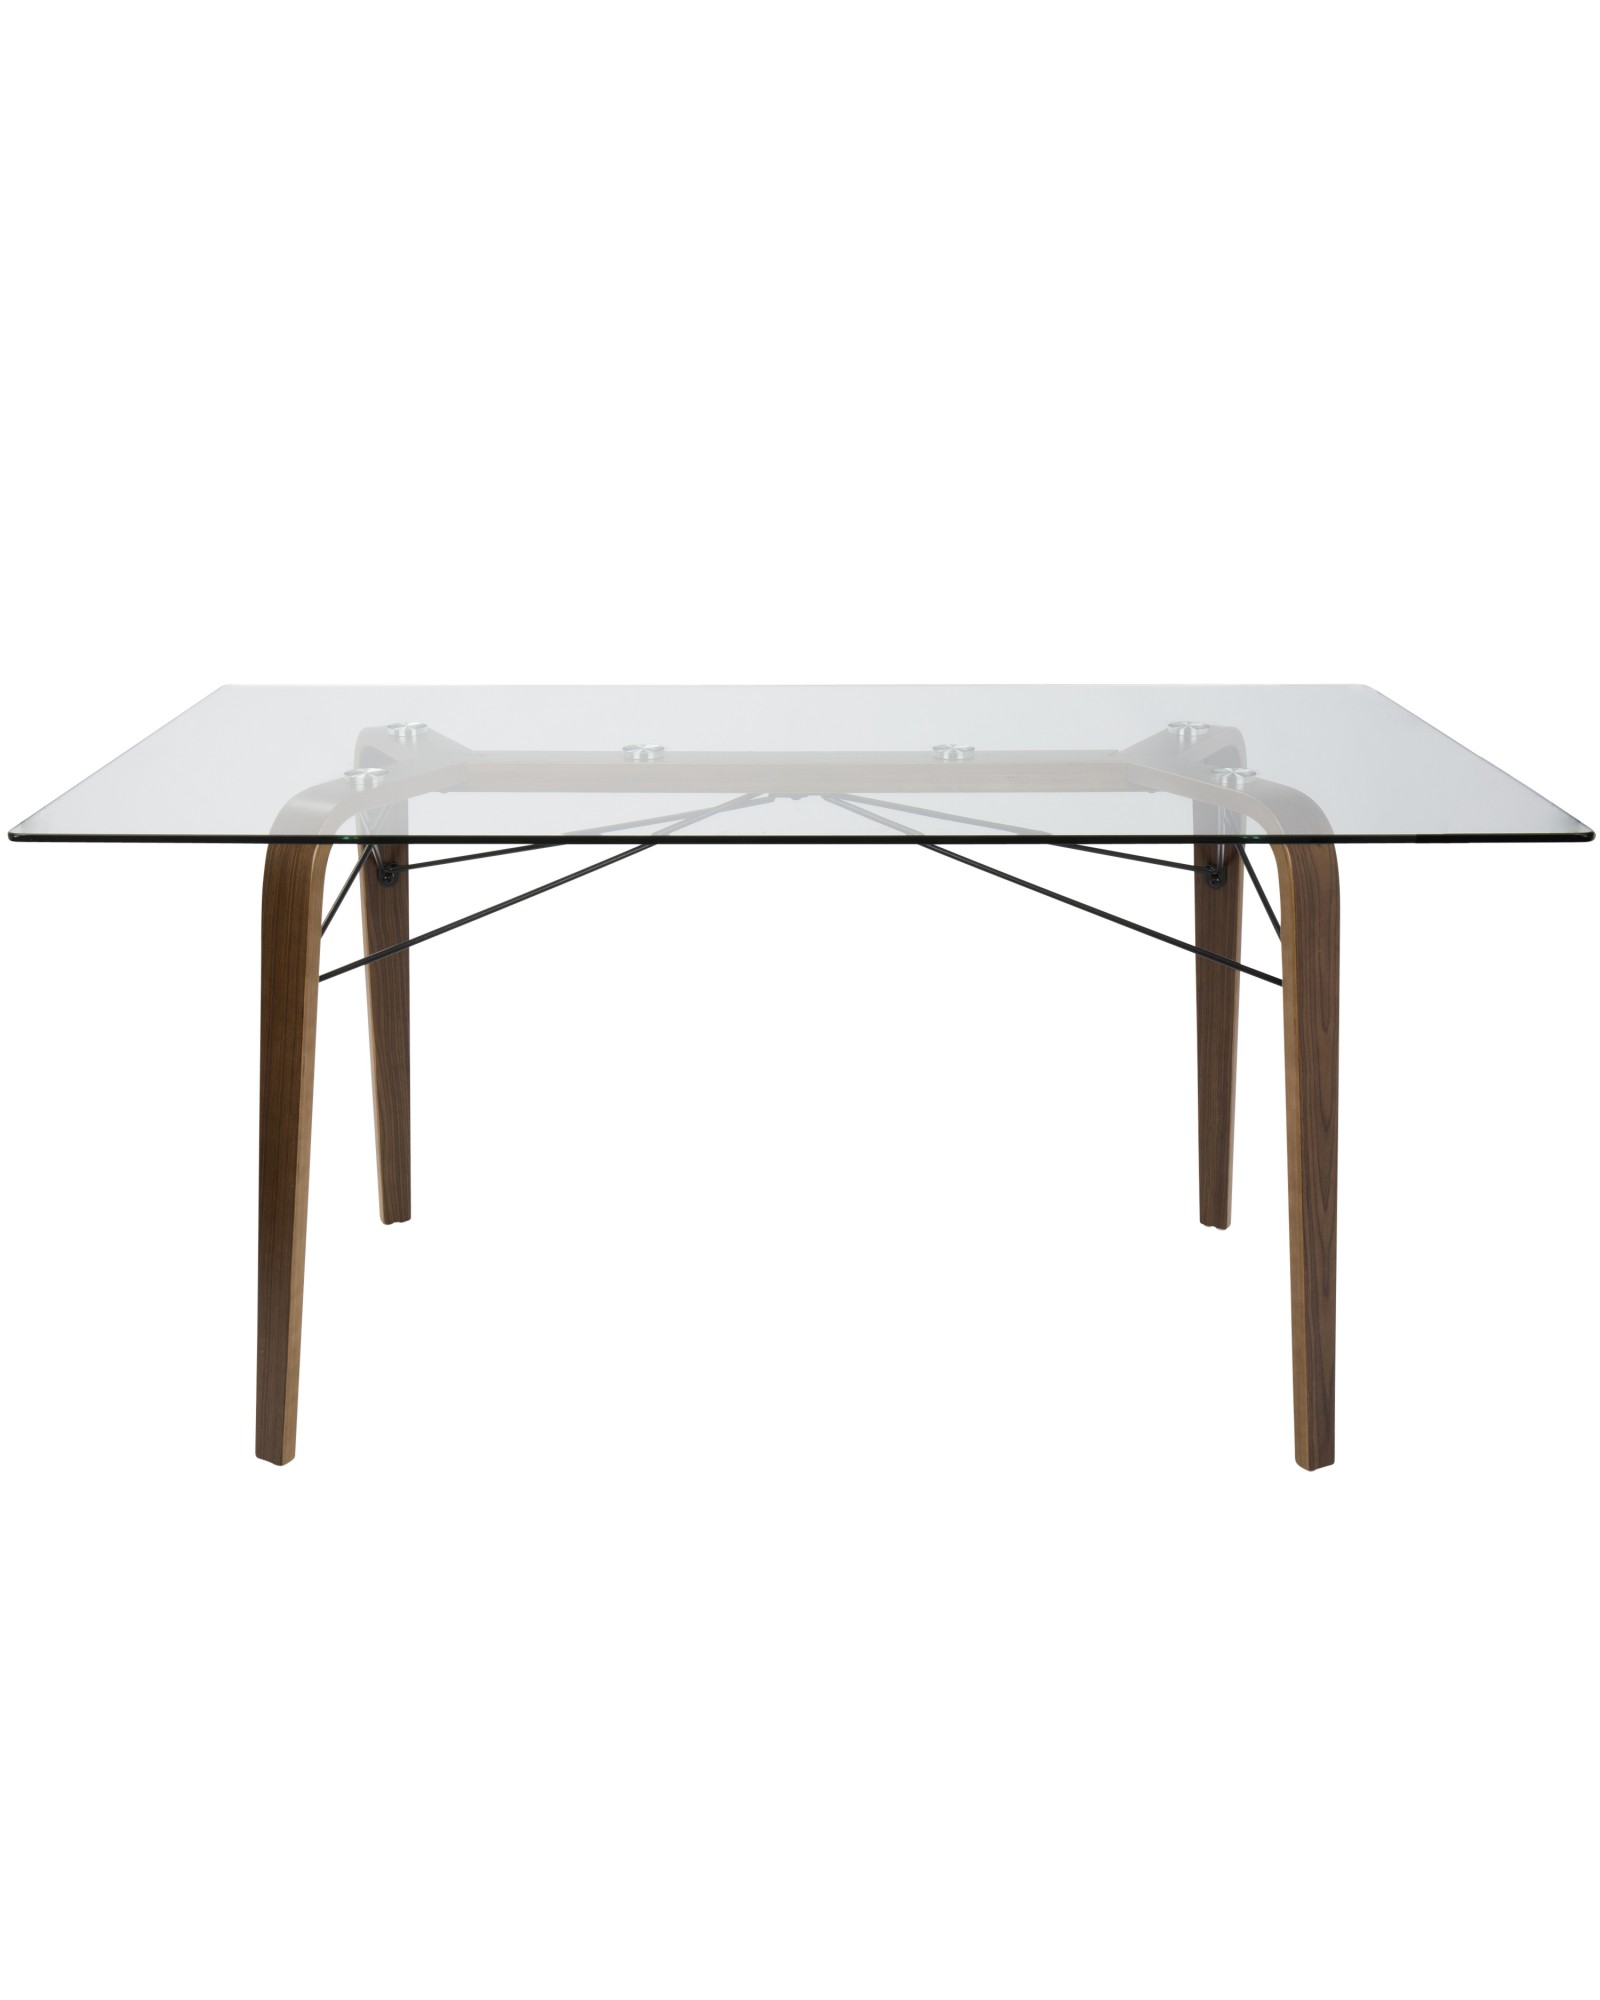 Trilogy Mid-Century Modern Dining Table in Walnut and Clear Glass